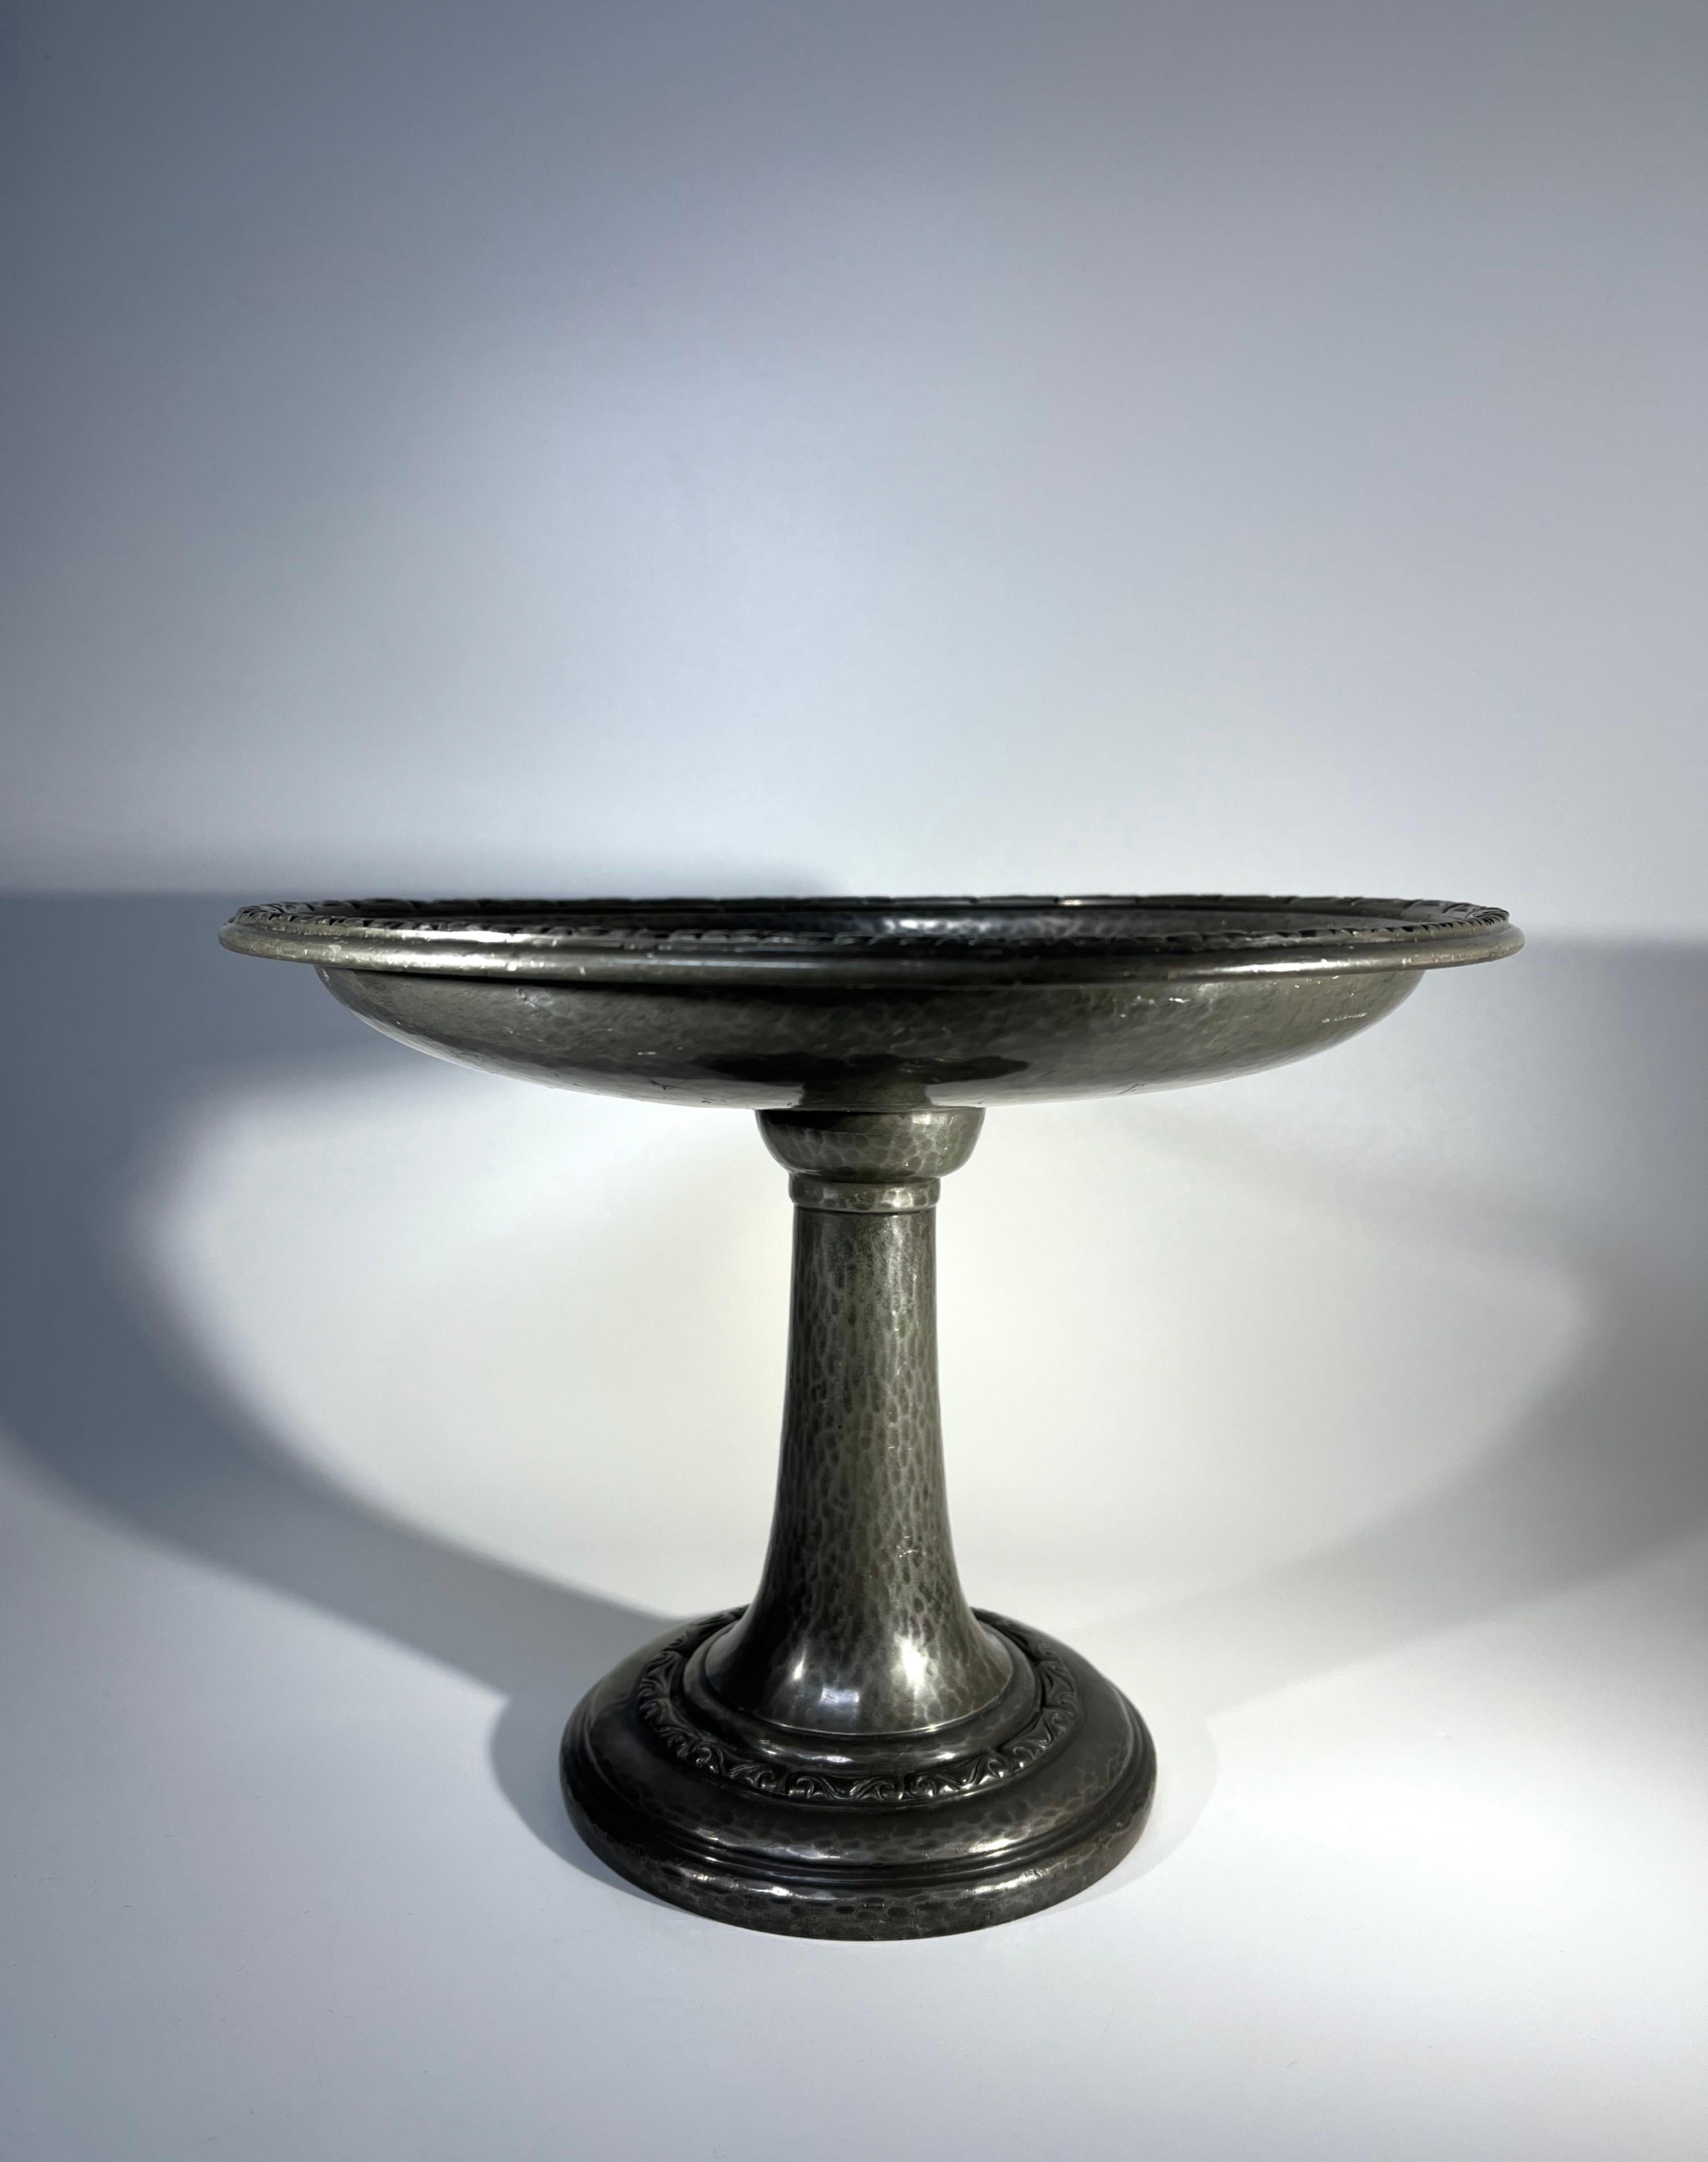 Art Nouveau, Liberty & Co., Tudric Hammered Antique Pewter Tazza c1910 For Sale 2